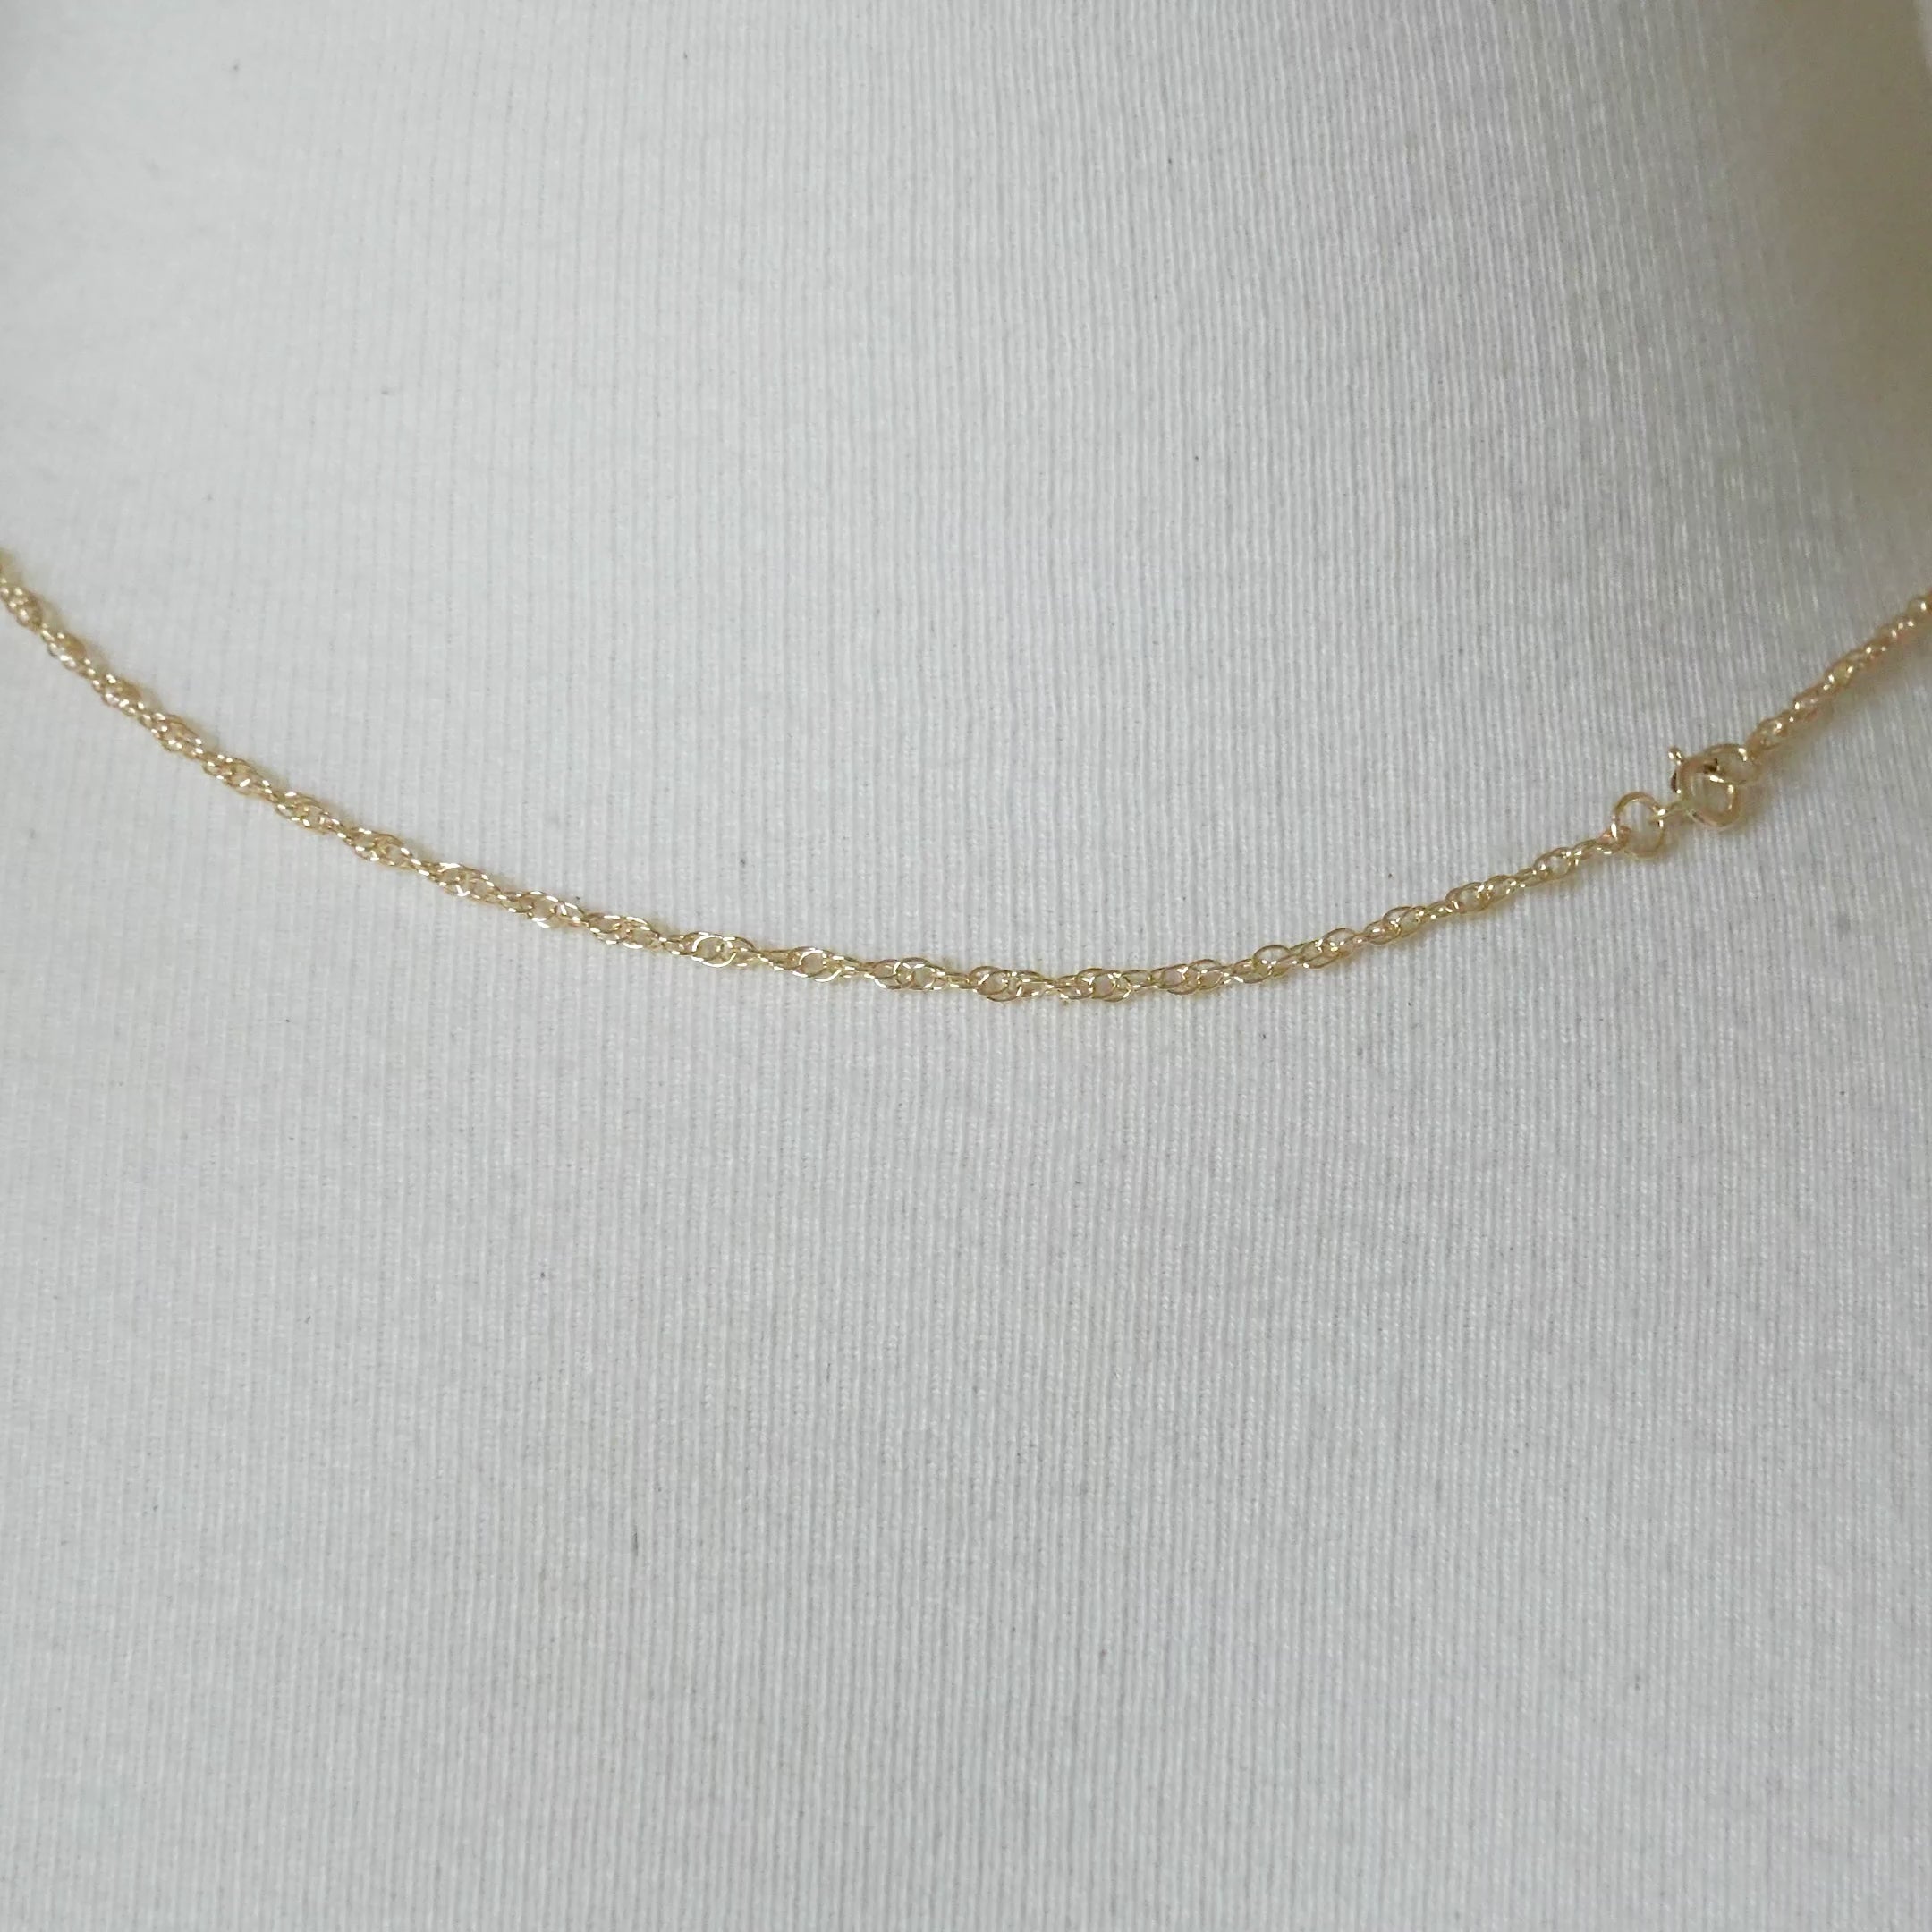 14k Yellow Gold 1.35mm Cable Rope Bracelet Anklet Necklace Choker Pendant Chain